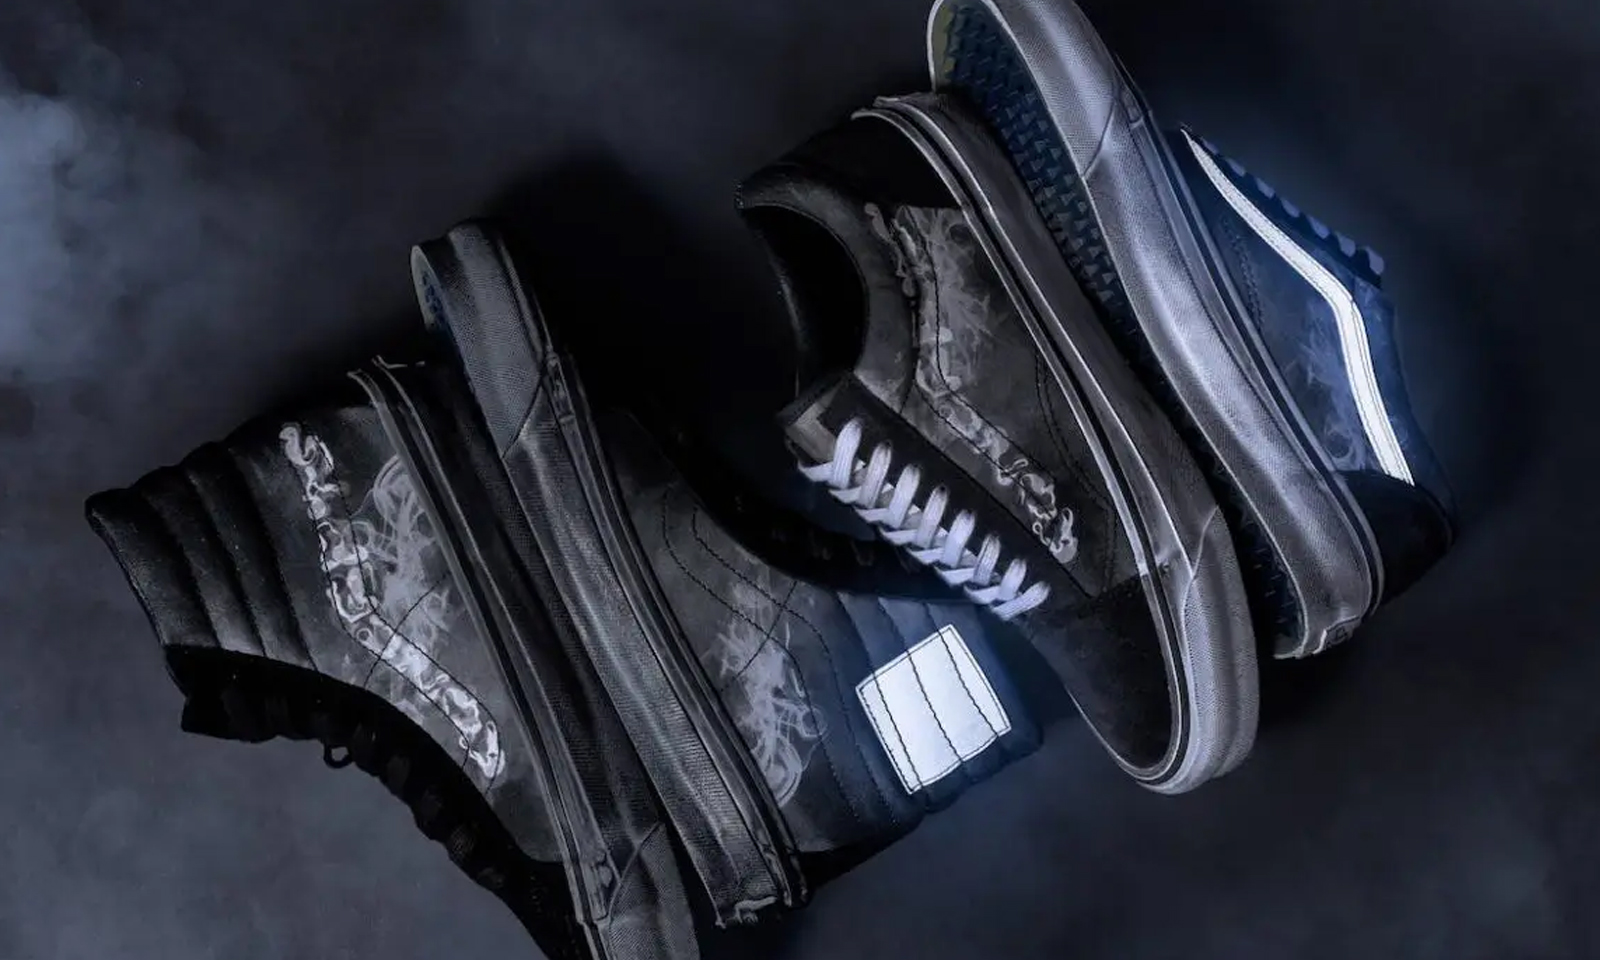 Concepts x Vault by Vans 「SMOKE AND Mirrors PACK」登场